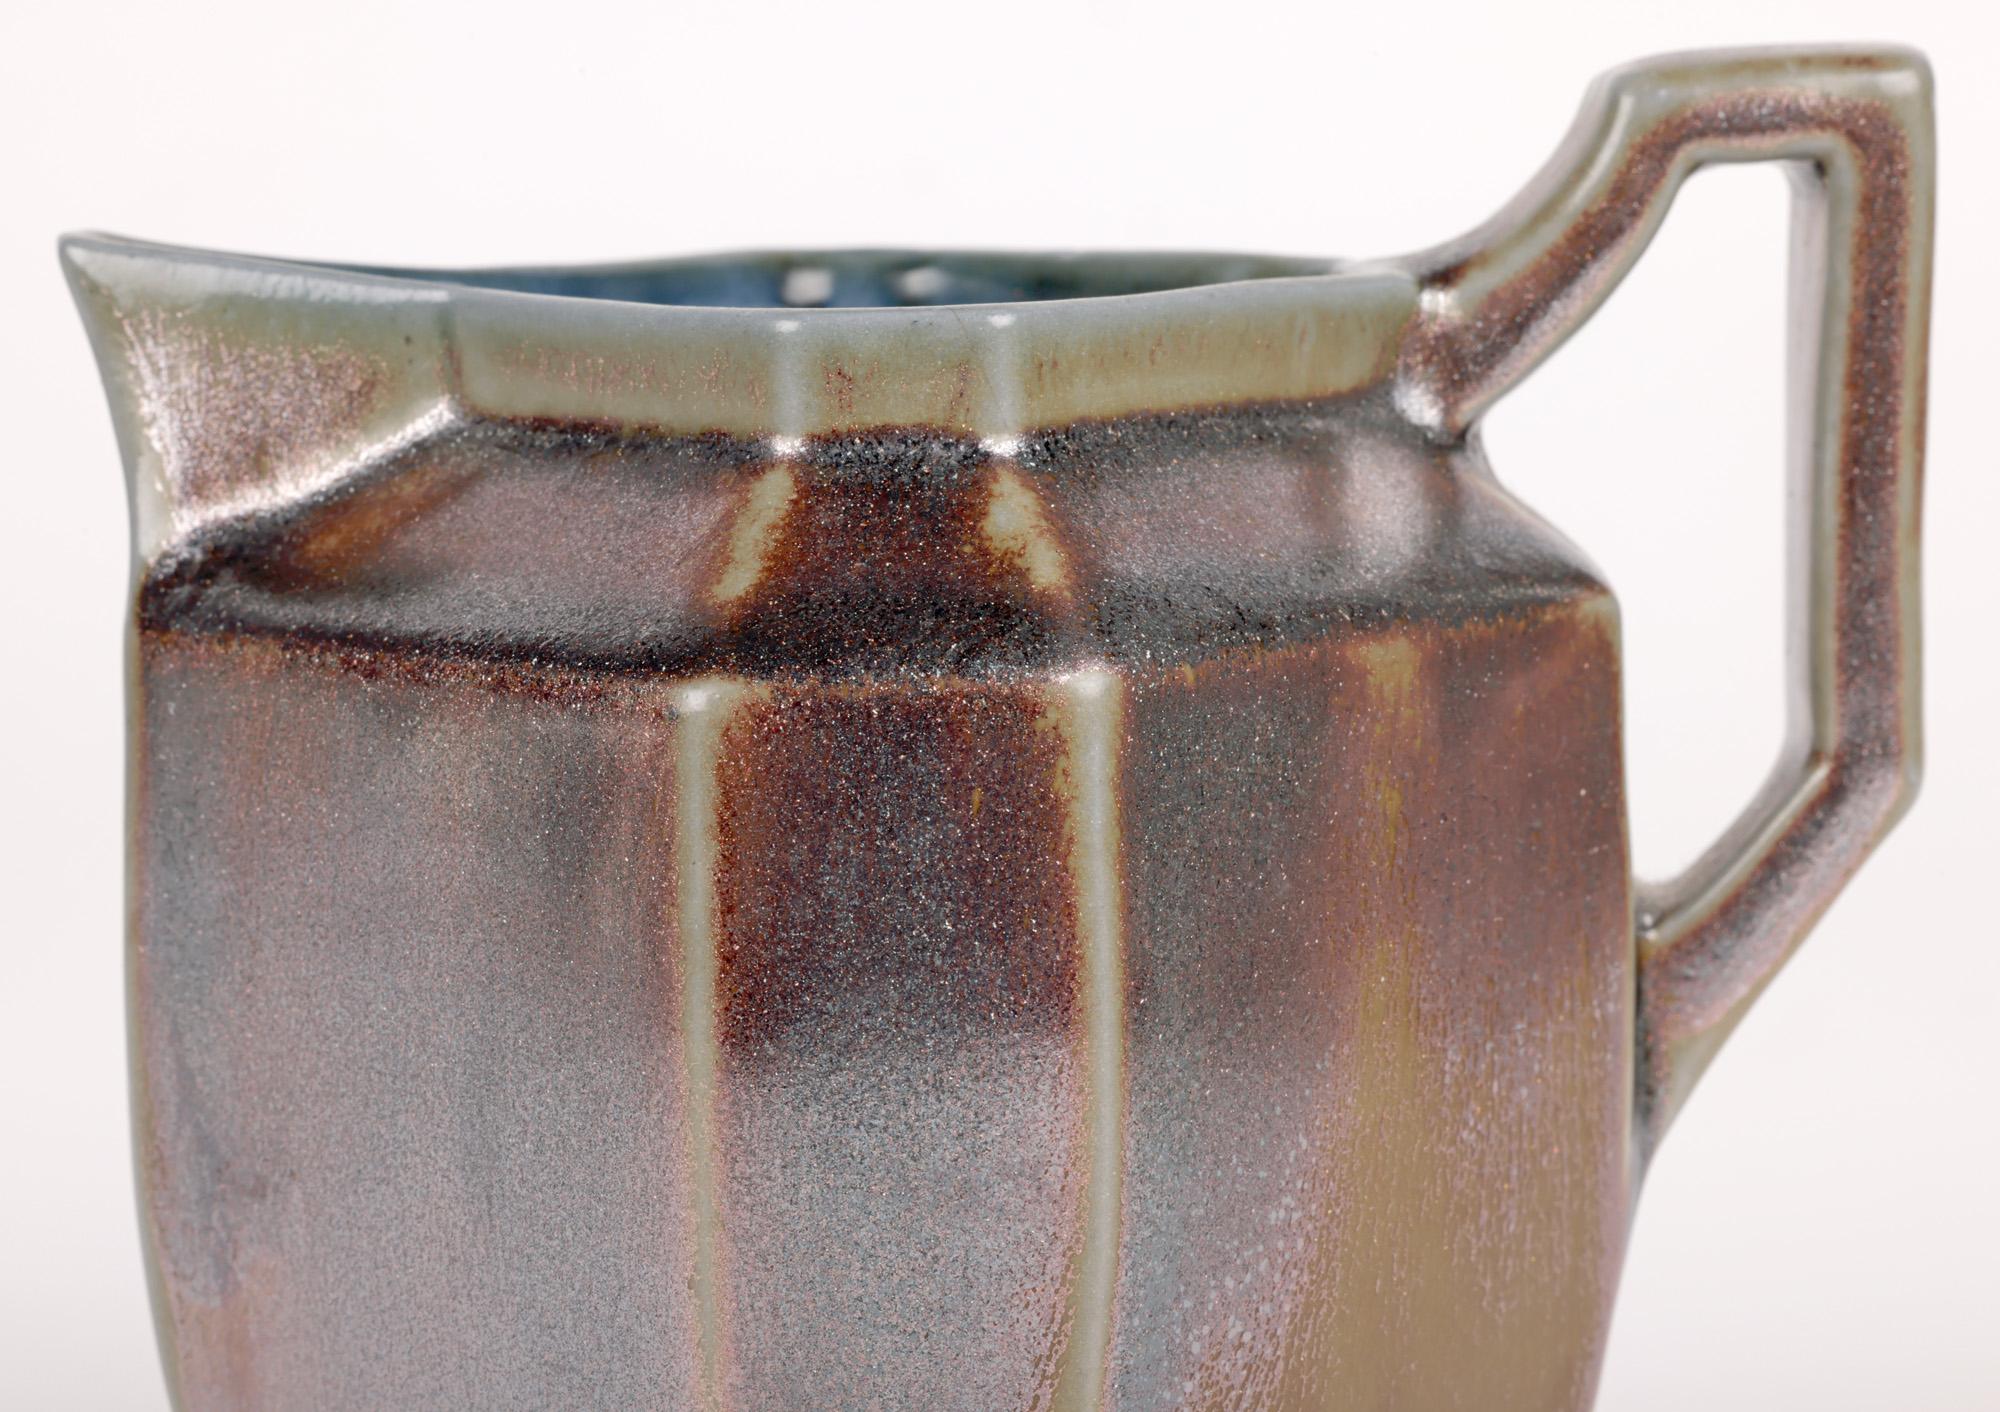 An unusual and exceptional metallic glazed studio pottery jug by Ray Finch and made at Winchcombe around 1981. The stoneware jug was gifted by Ray Finch to the previous owner on 5th August 1981 and was described as a ‘double cream’ jug and is a